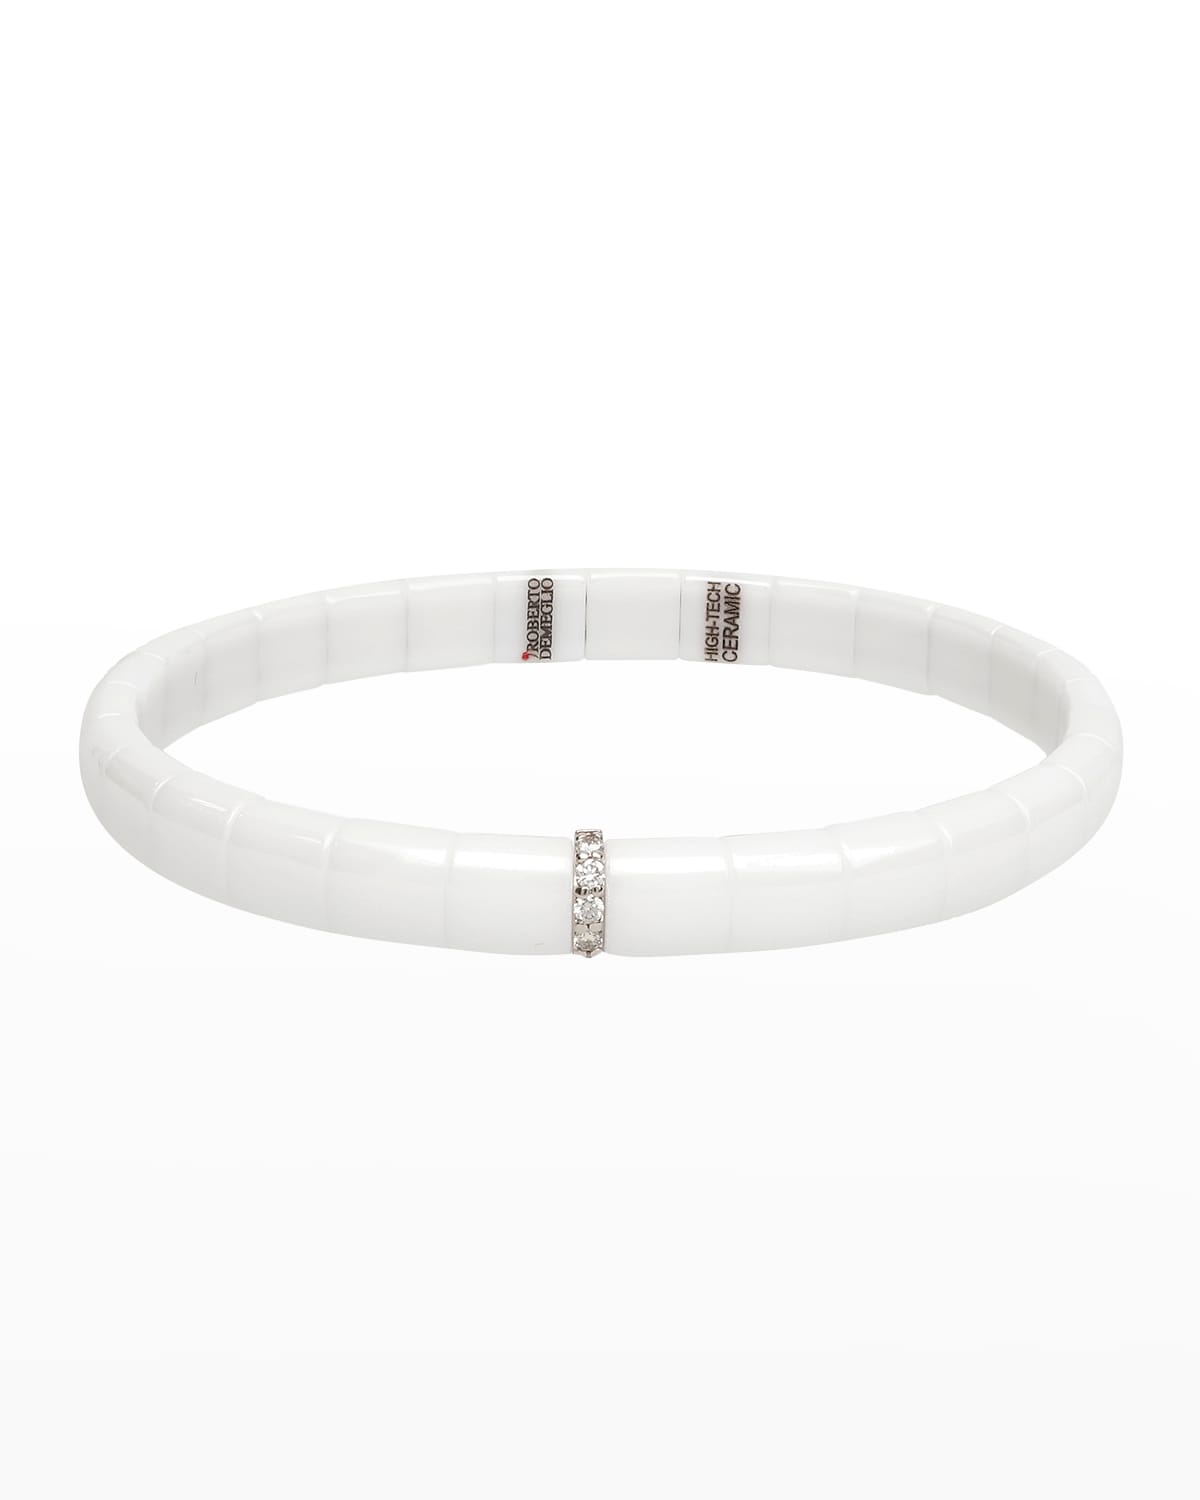 White Gold and White Ceramic Pura Stretch Bracelet with One Diamond Sections